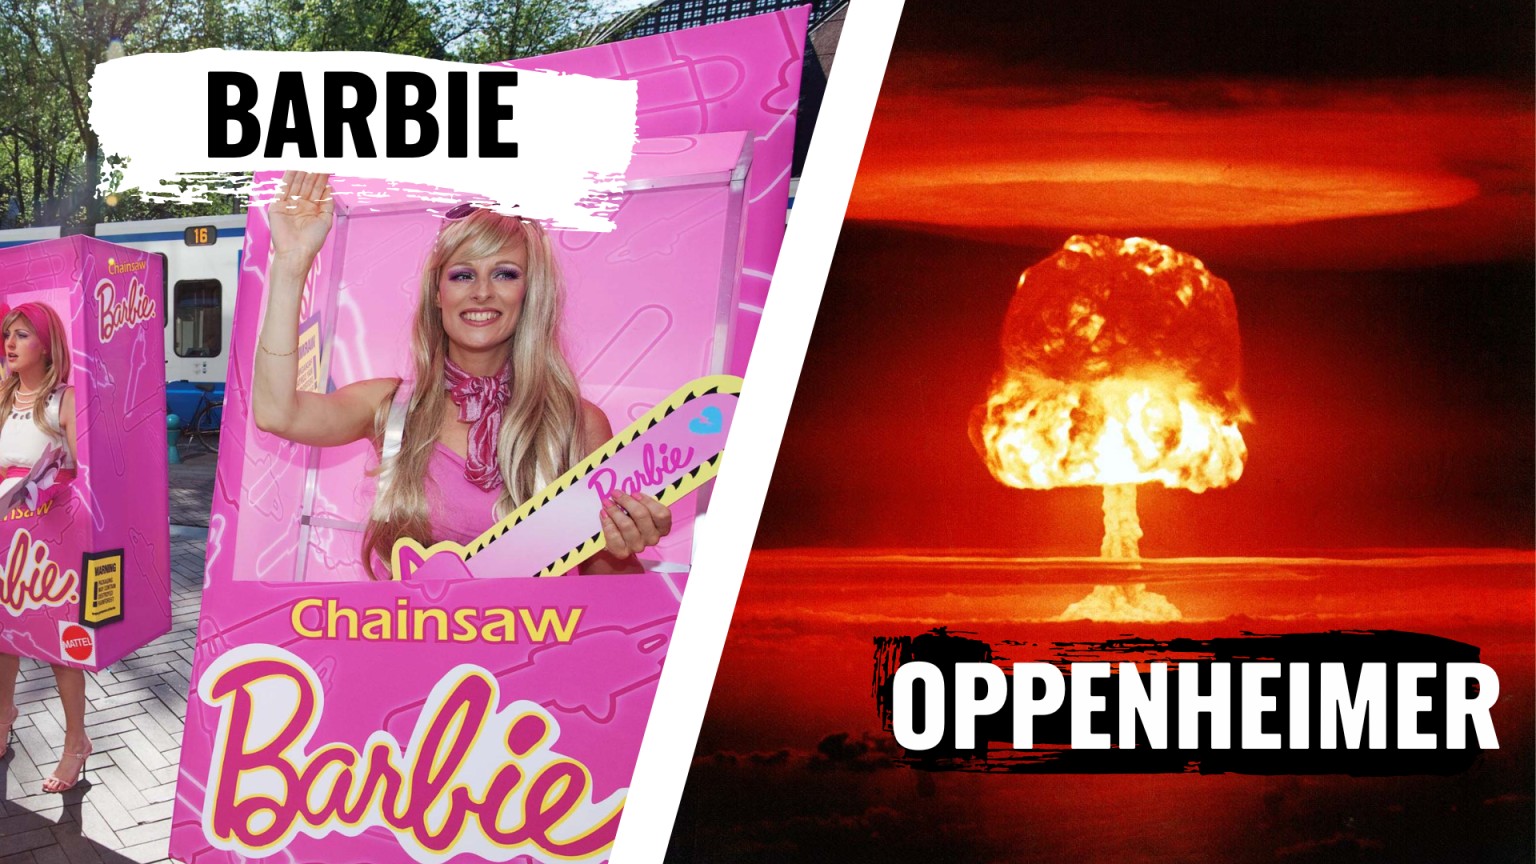 Miniature for Barbie Vs Oppenheimer blog. Left: June 2011, Barbie Mattel Action in Amsterdam Greenpeace activists dressed as "Barbie" and "Ken" pose with pink chainsaws to hand out campaign leaflets to the public. Right: March 1954, Castle Romeo nuclear test (yield 11 Mt) on Bikini Atoll. National Nuclear Security Administration Nevada Site Office Photo Library under number XX-33. US Department Of Energy, Public Domain.